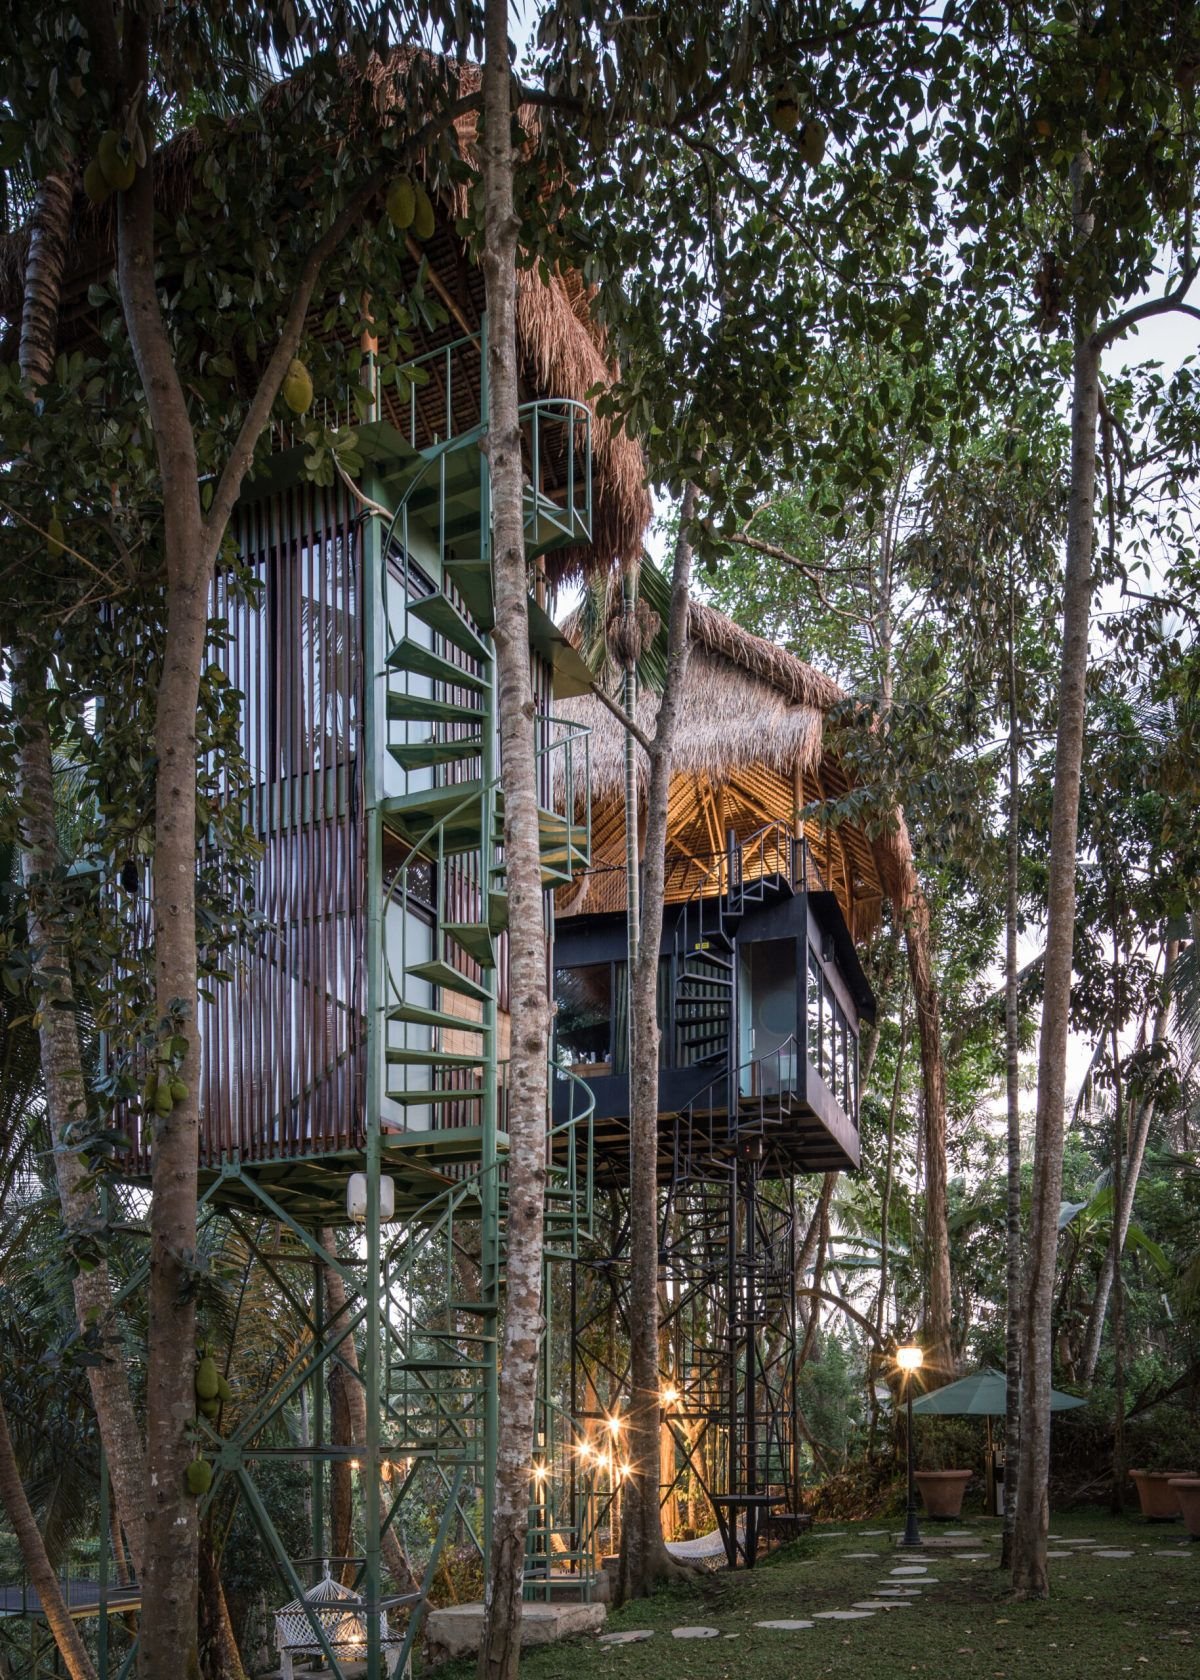 The tree hotel is located in the middle of the Balinese forest